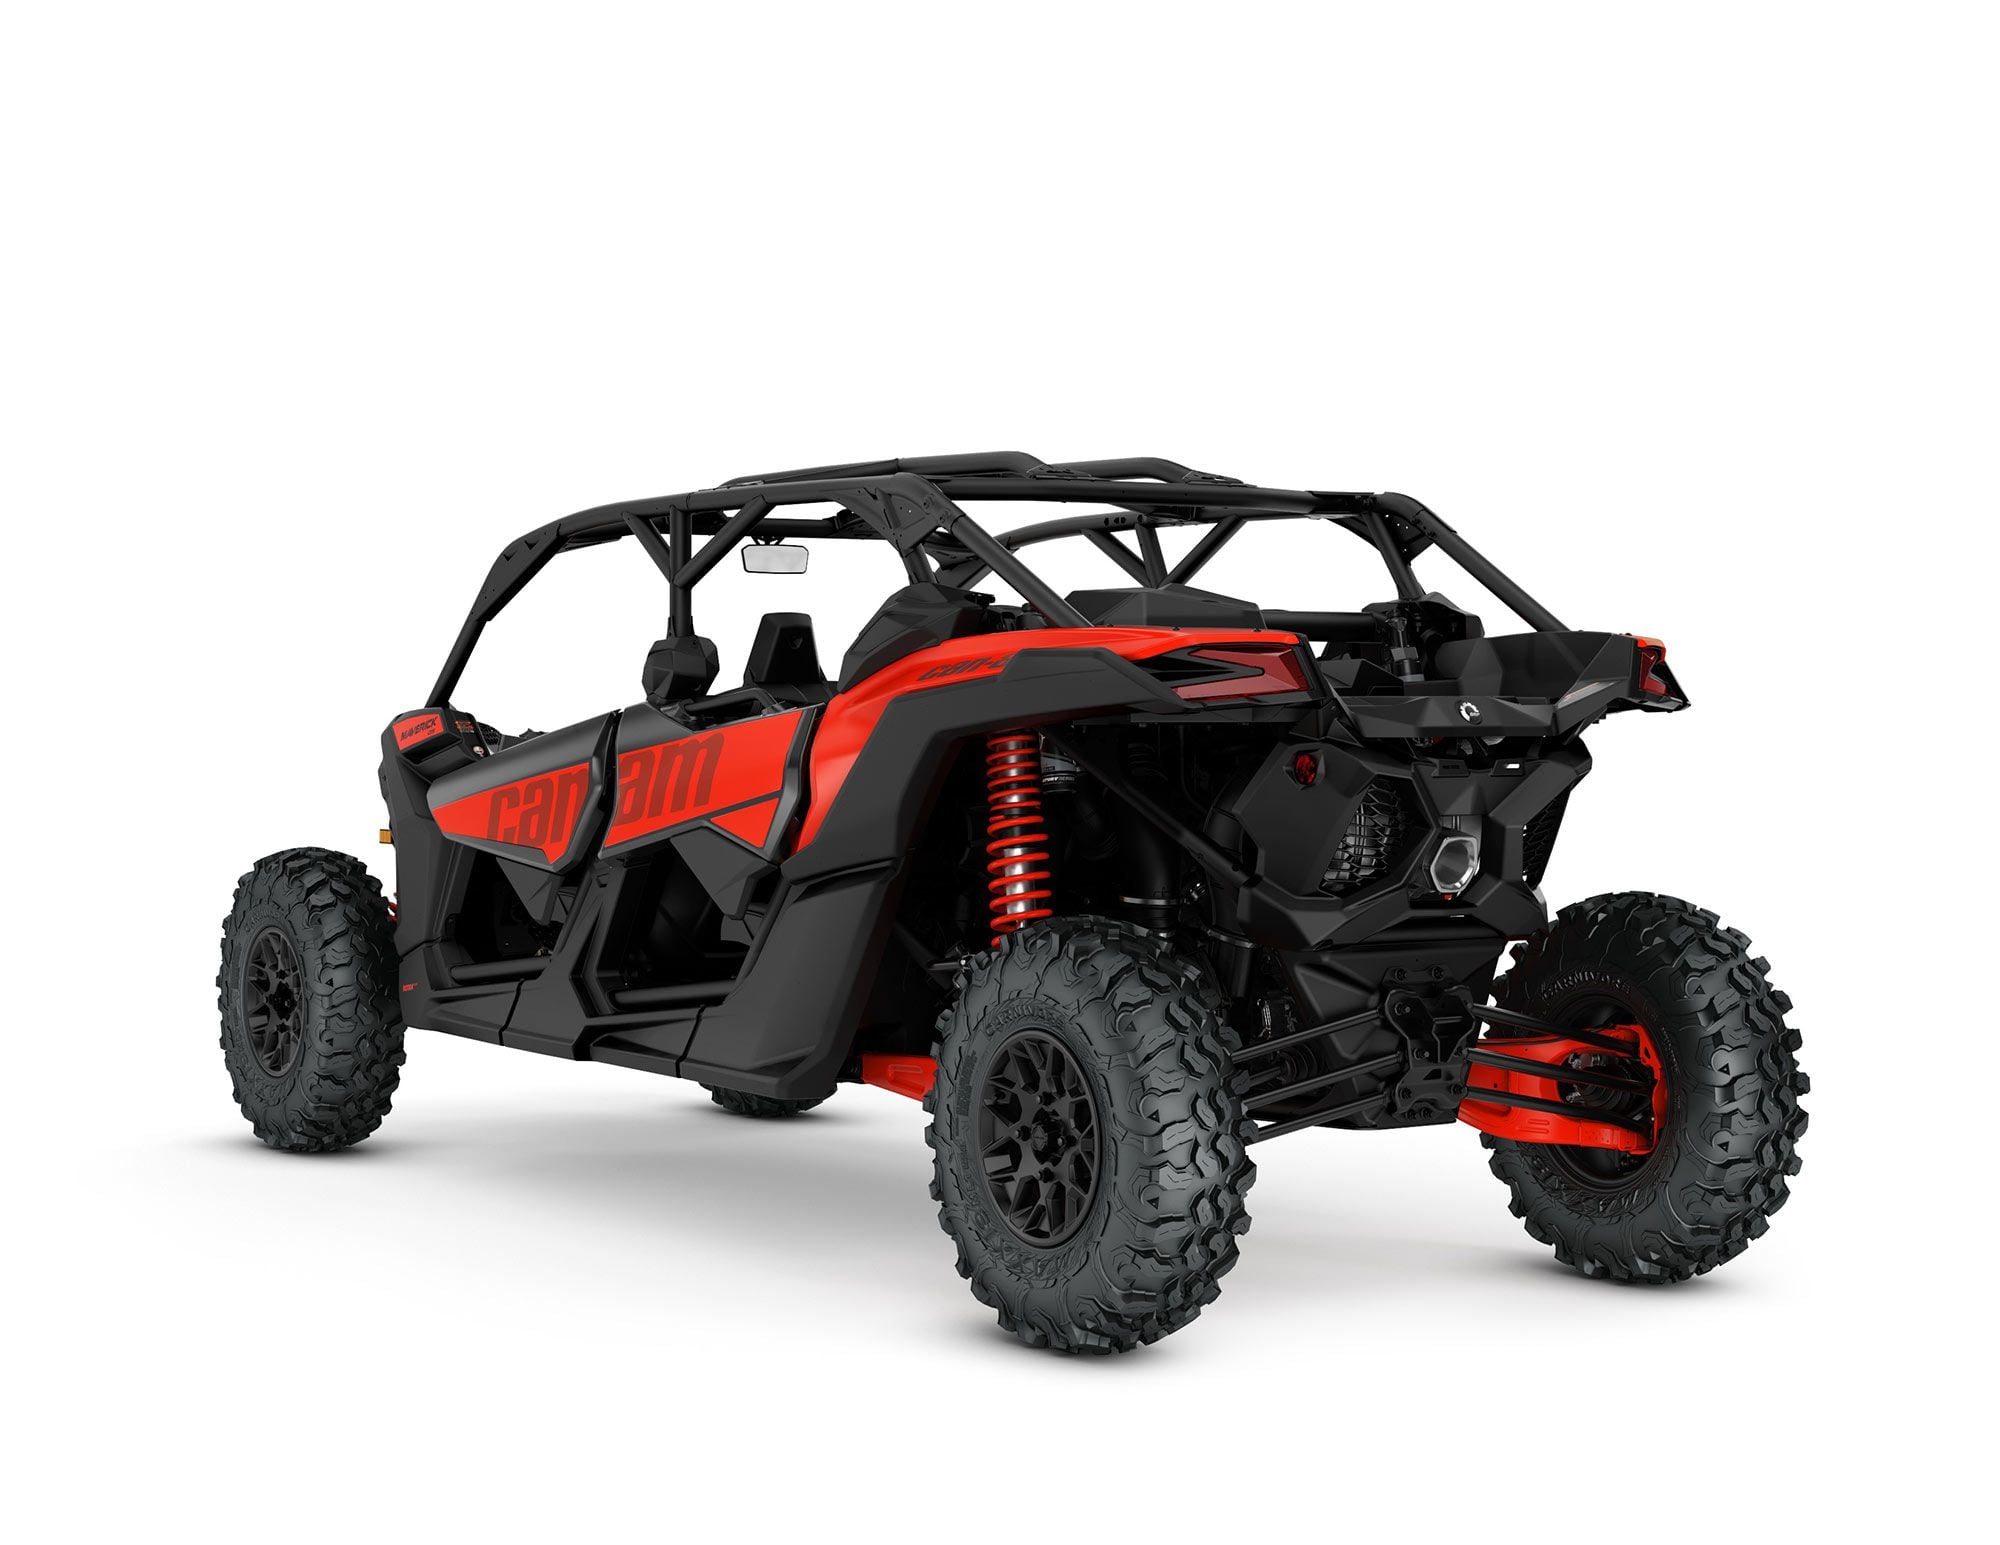 2022 Can-Am Maverick X3 Max DS Turbo RR rear view in Can-Am Red color.